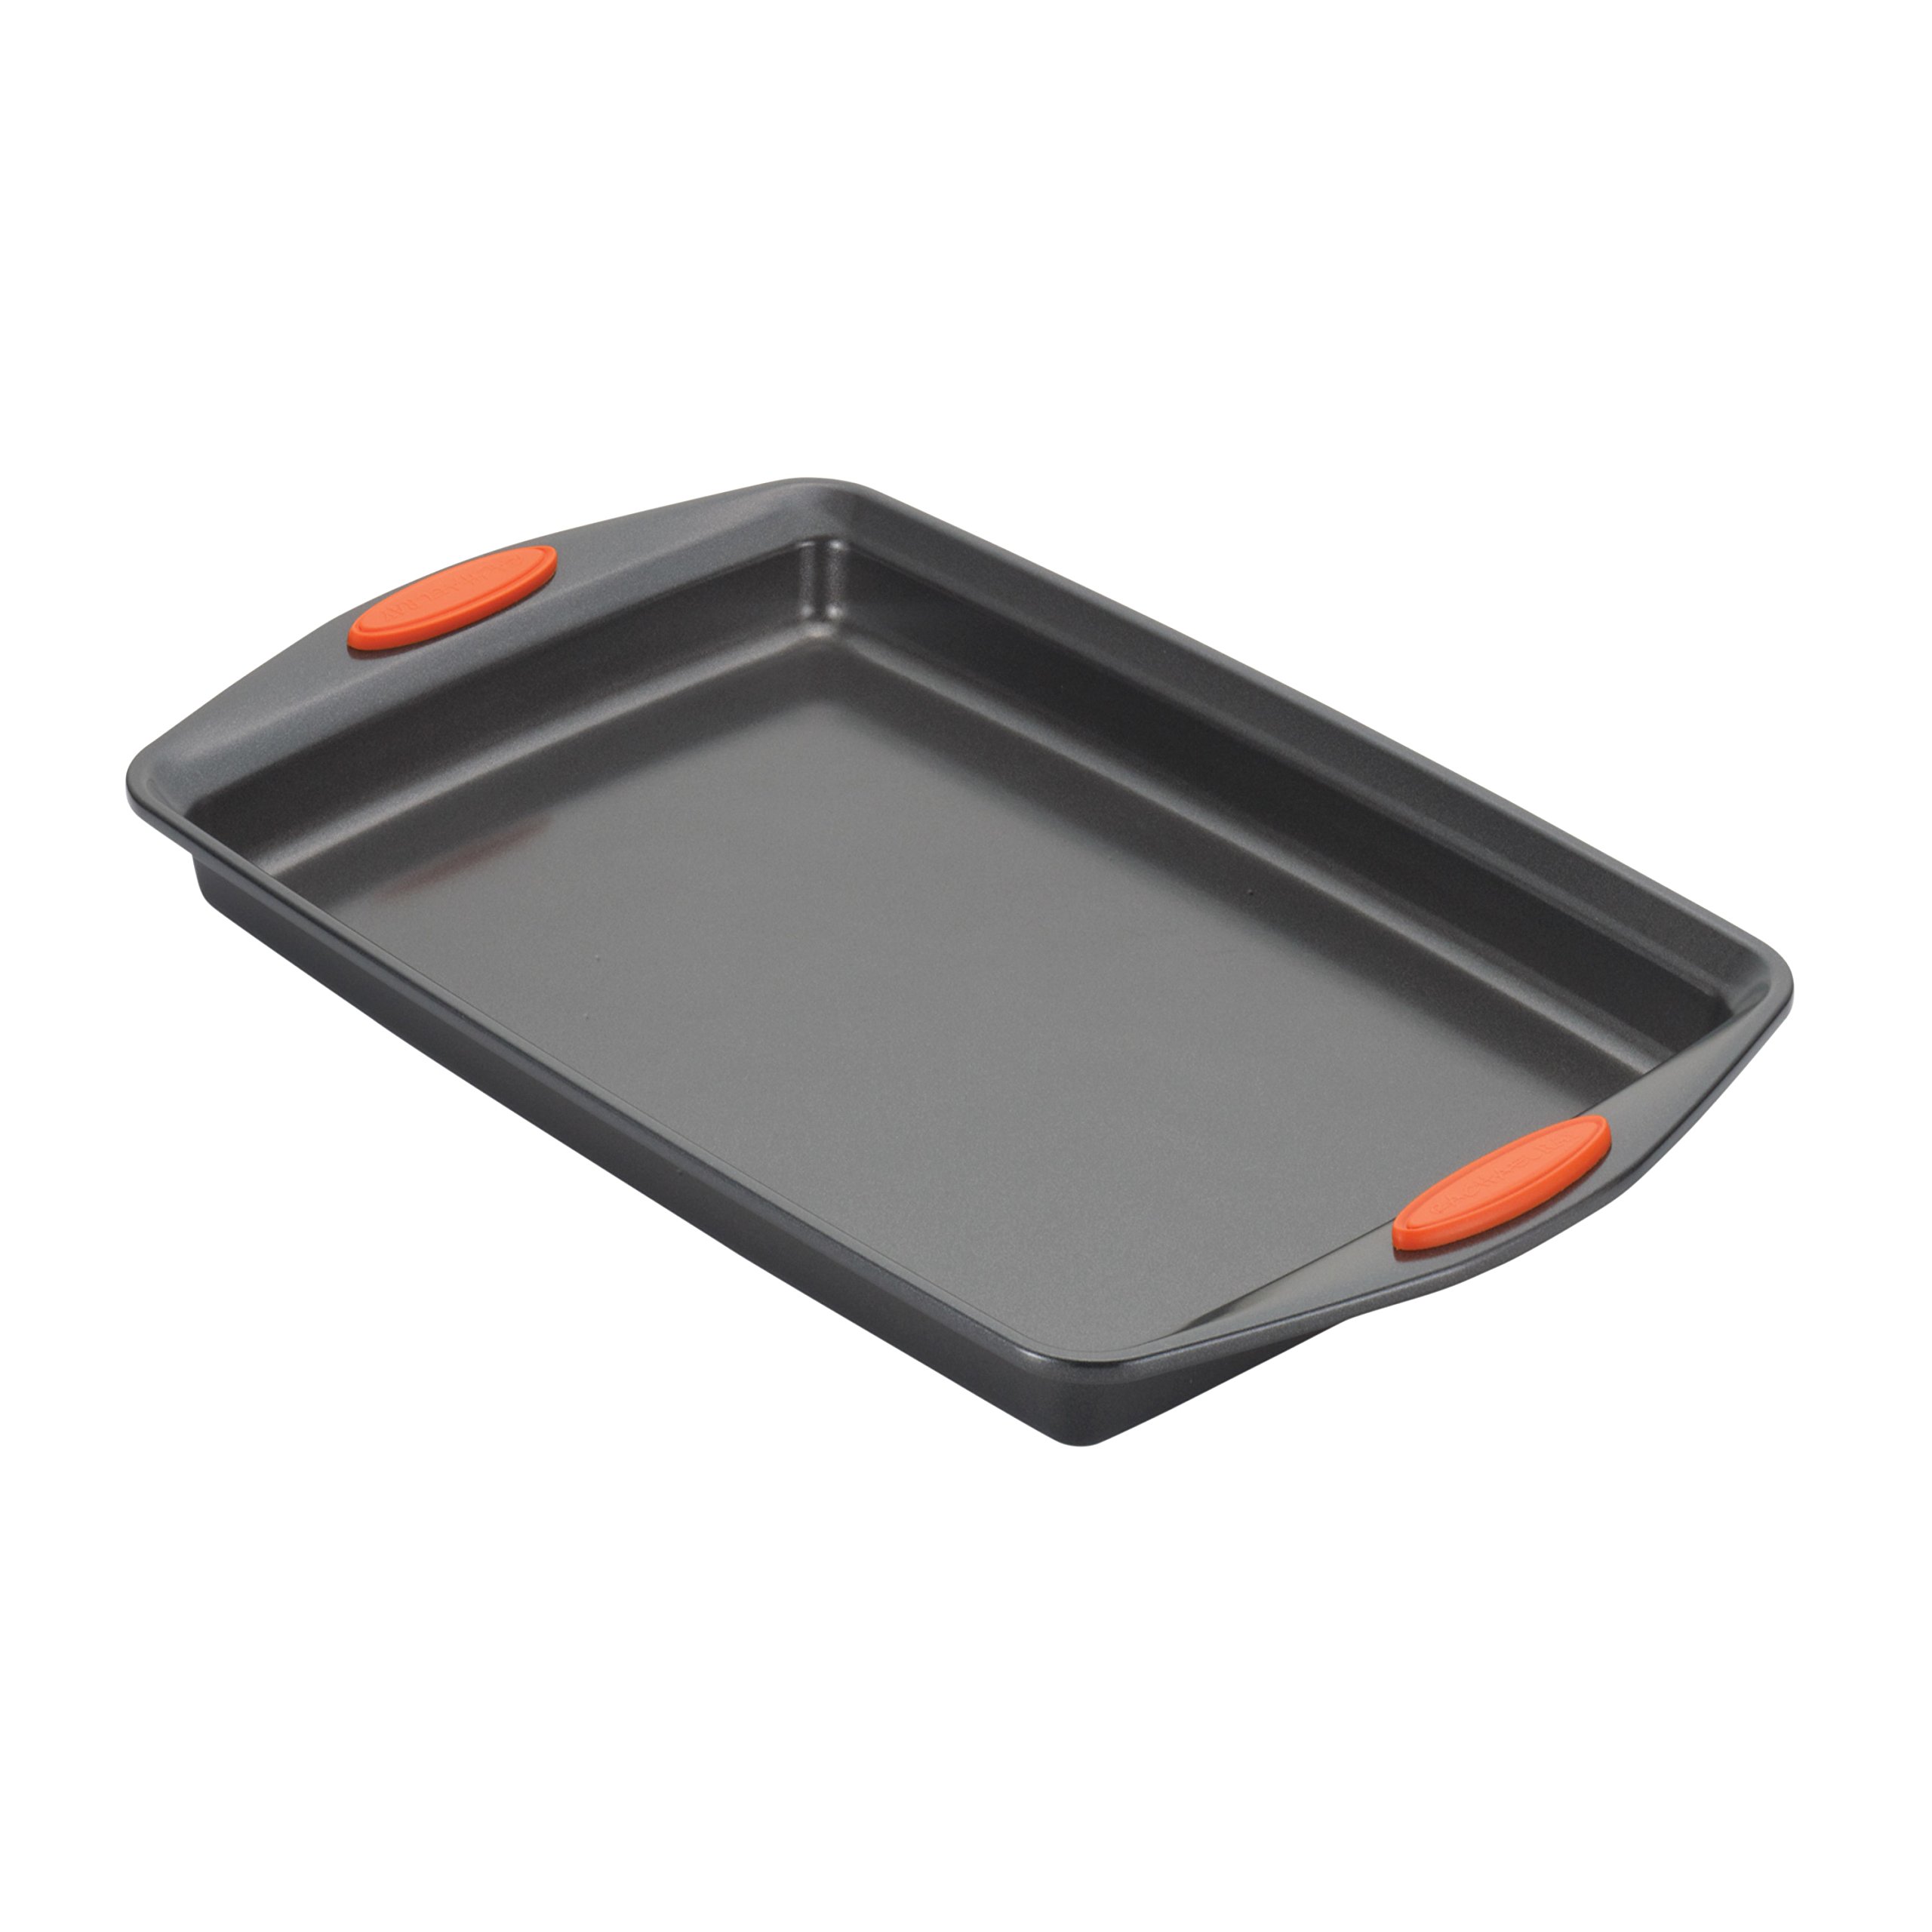 Rachael Ray Nonstick Bakeware Set with Grips, Nonstick Cookie Sheets / Baking Sheets - 3 Piece, Gray with Orange Grips